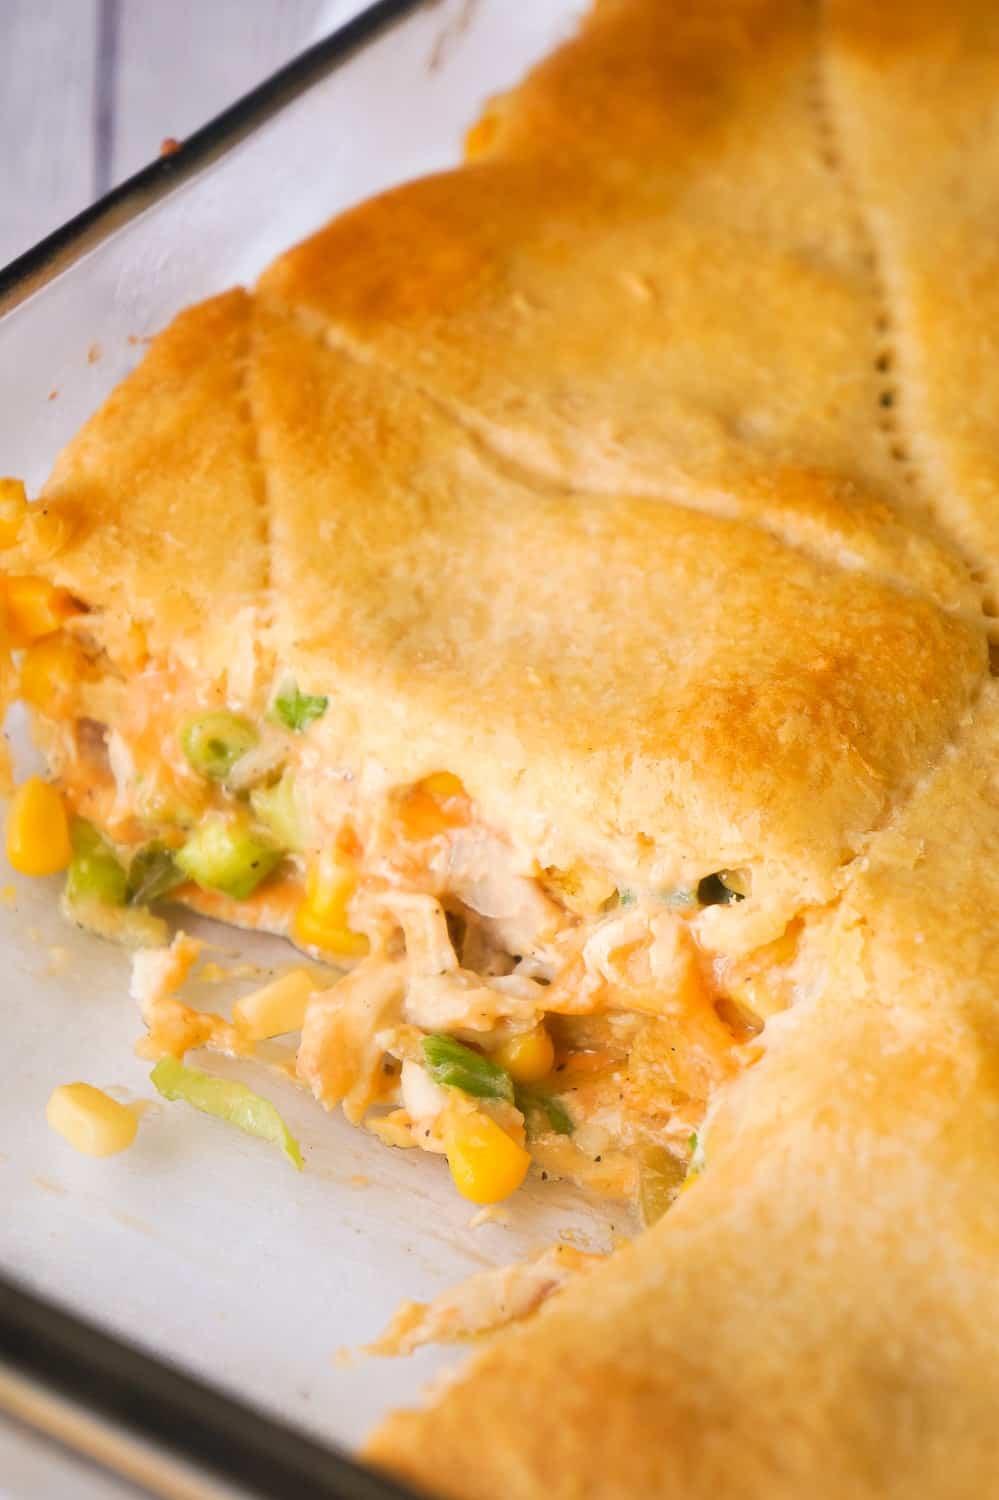 Fritos Chicken Casserole is an easy dinner recipe using precooked rotisserie chicken. This delicious casserole is loaded with shredded chicken, corn chips, green chilies and cheddar cheese then topped with Pillsbury Crescent Roll dough.